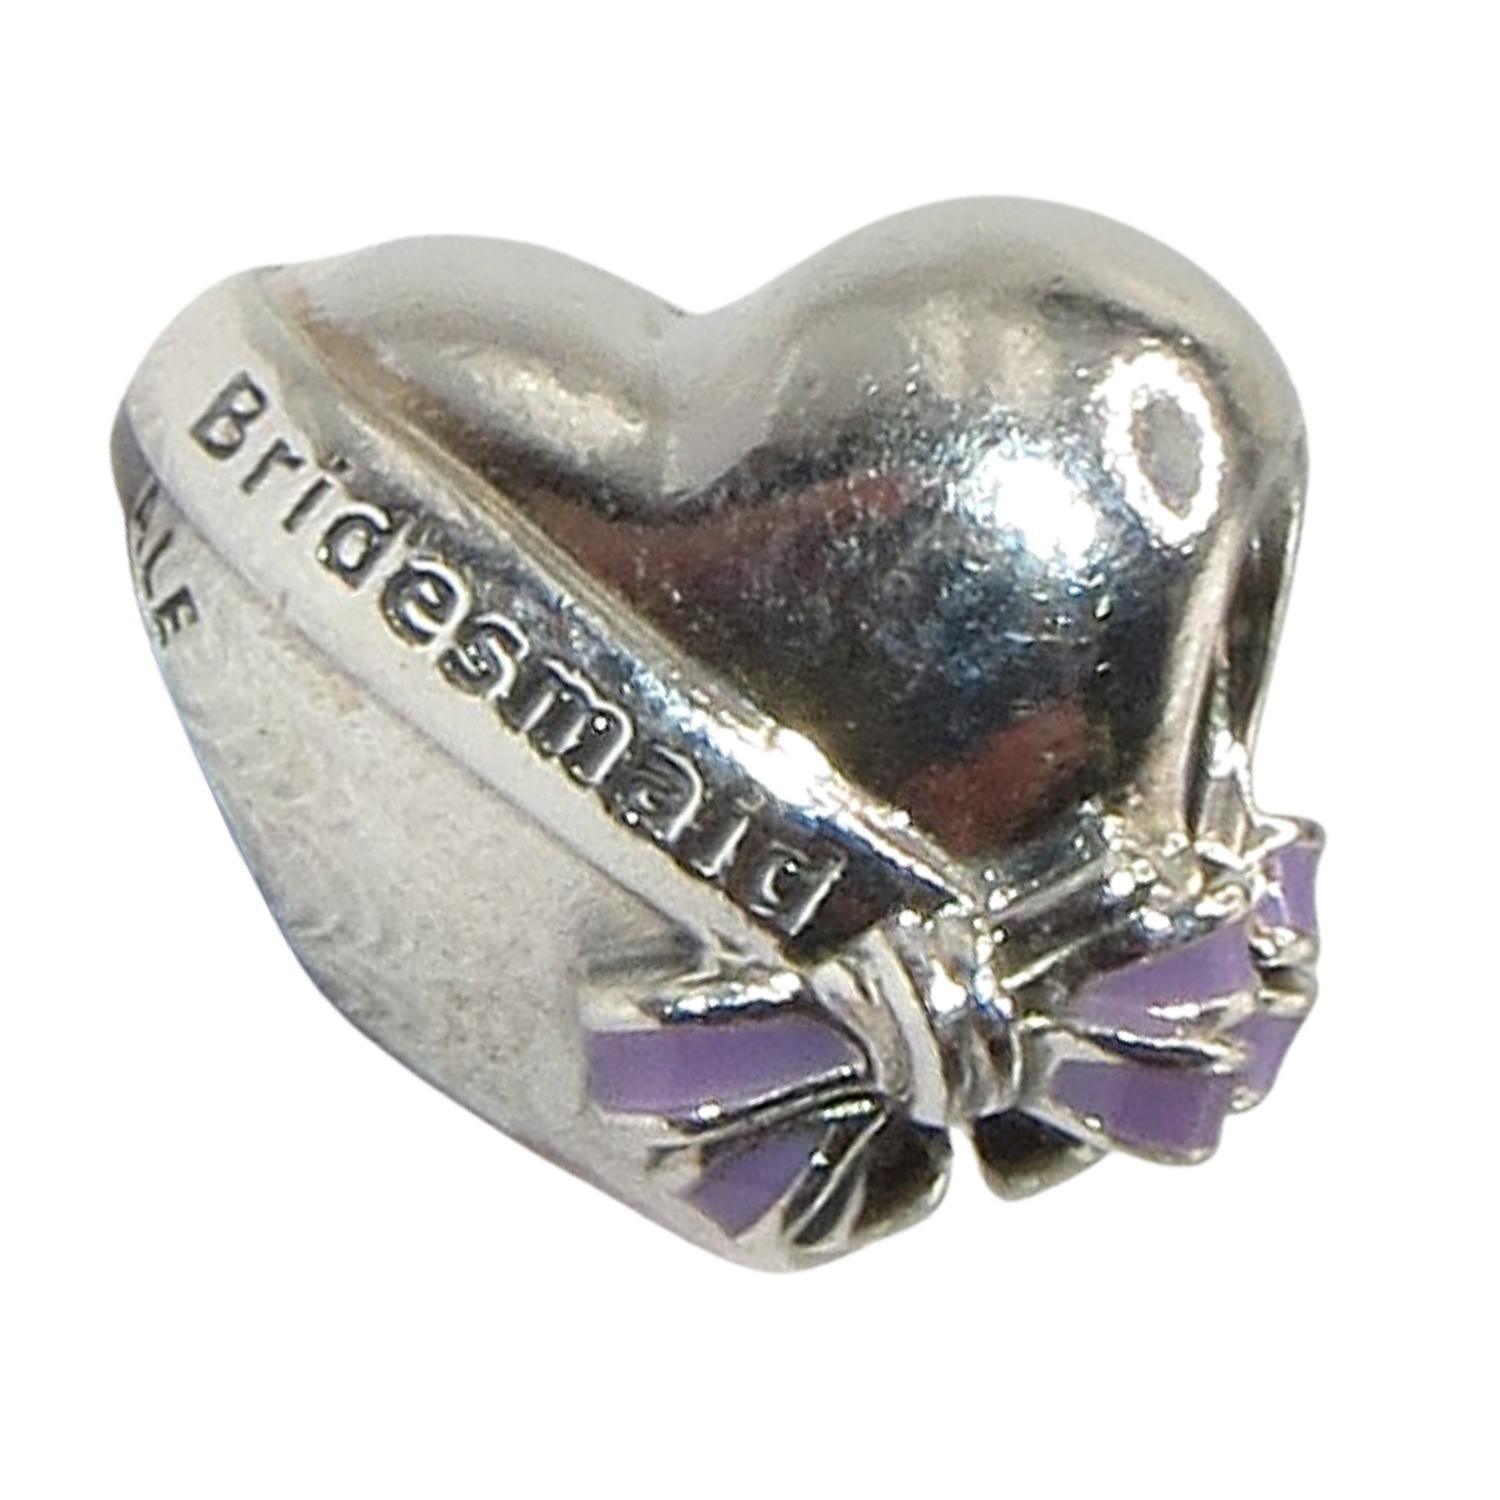 PANDORA 797272EN159 Bridesmaid - Sterling Silver Heart and BRIDESMAID Banner- Women's Charm for Charm Bracelets - Charming Jilly